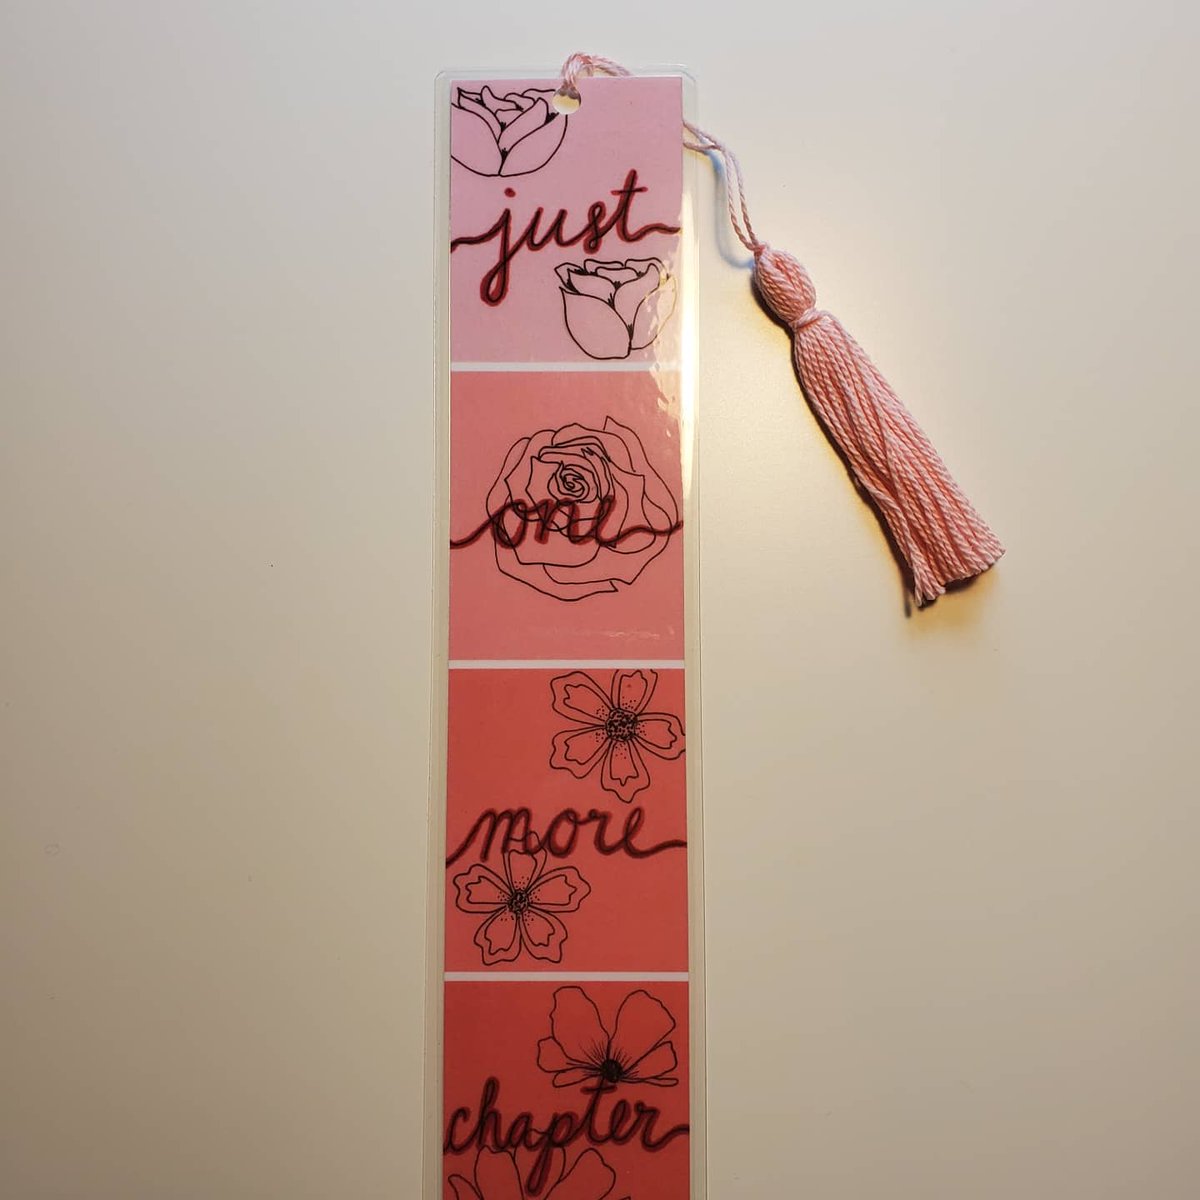 All bookmarks now only $0.60-$3.90 +up to $1 shipping!